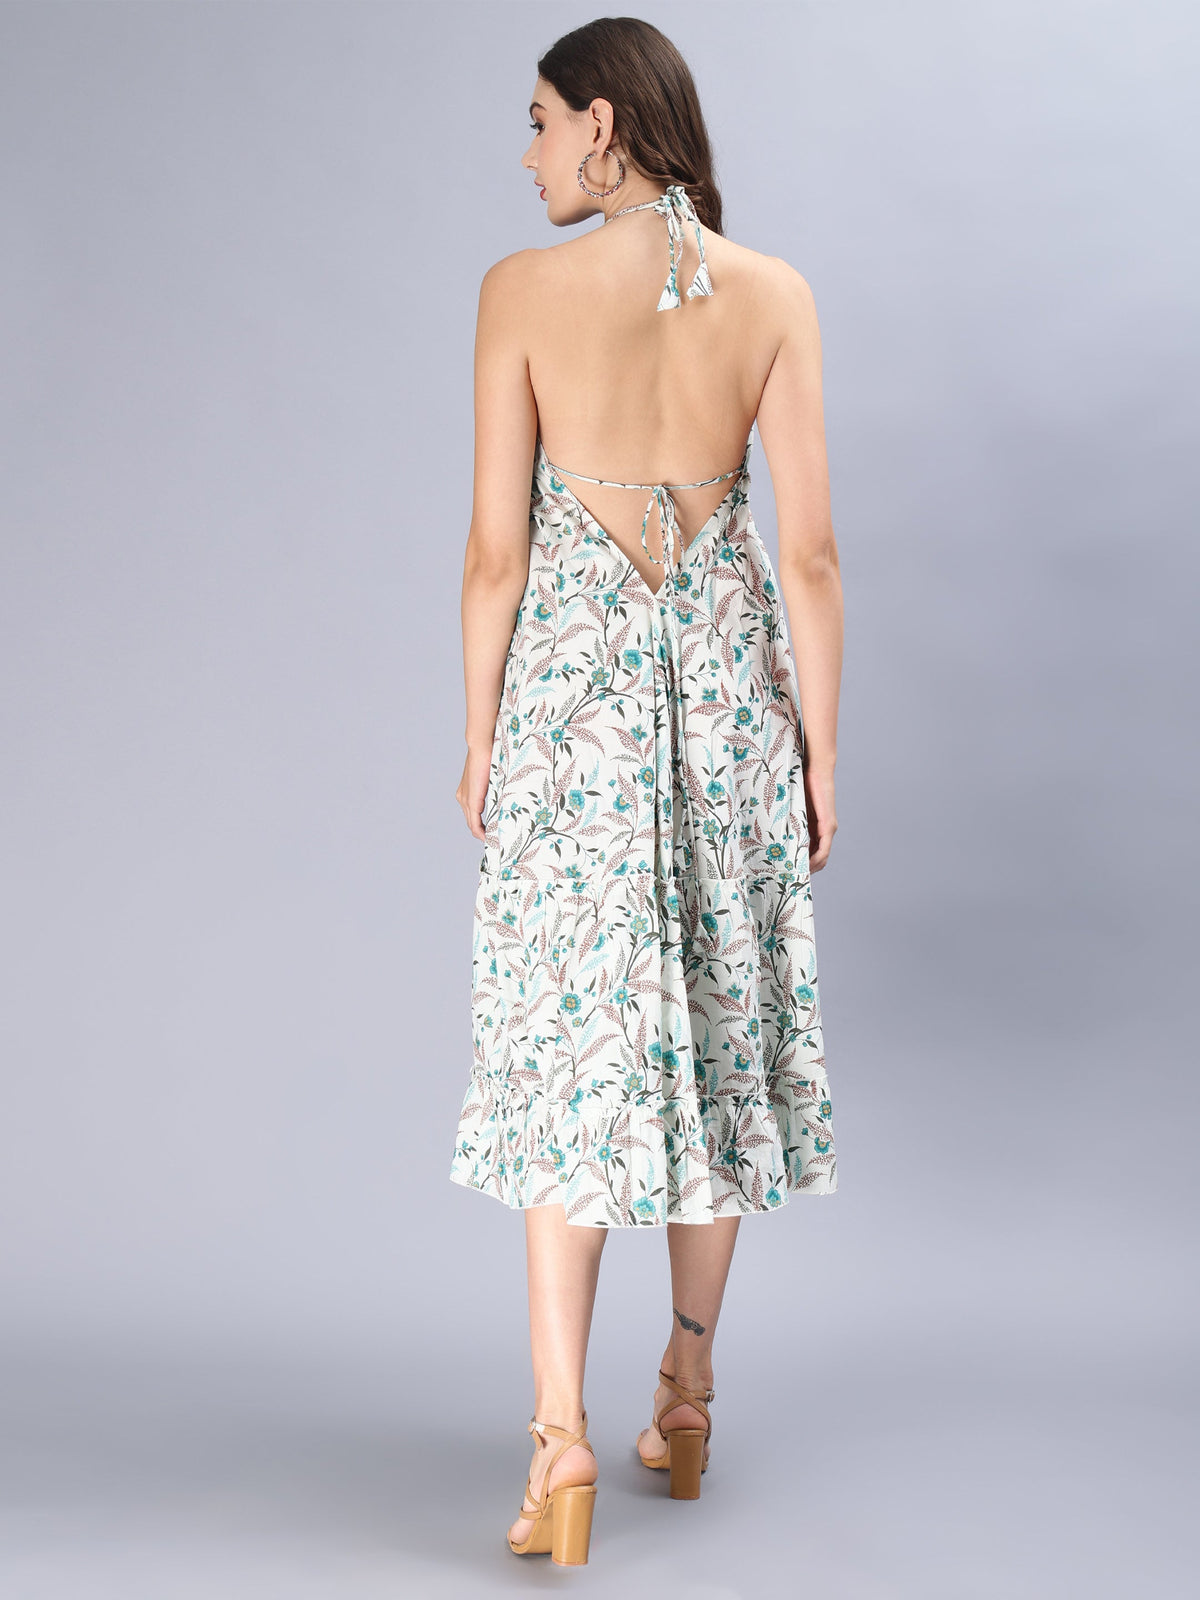 White floral printed cotton tie back, backless blue Free Size Handkerchief maxi tiered dress